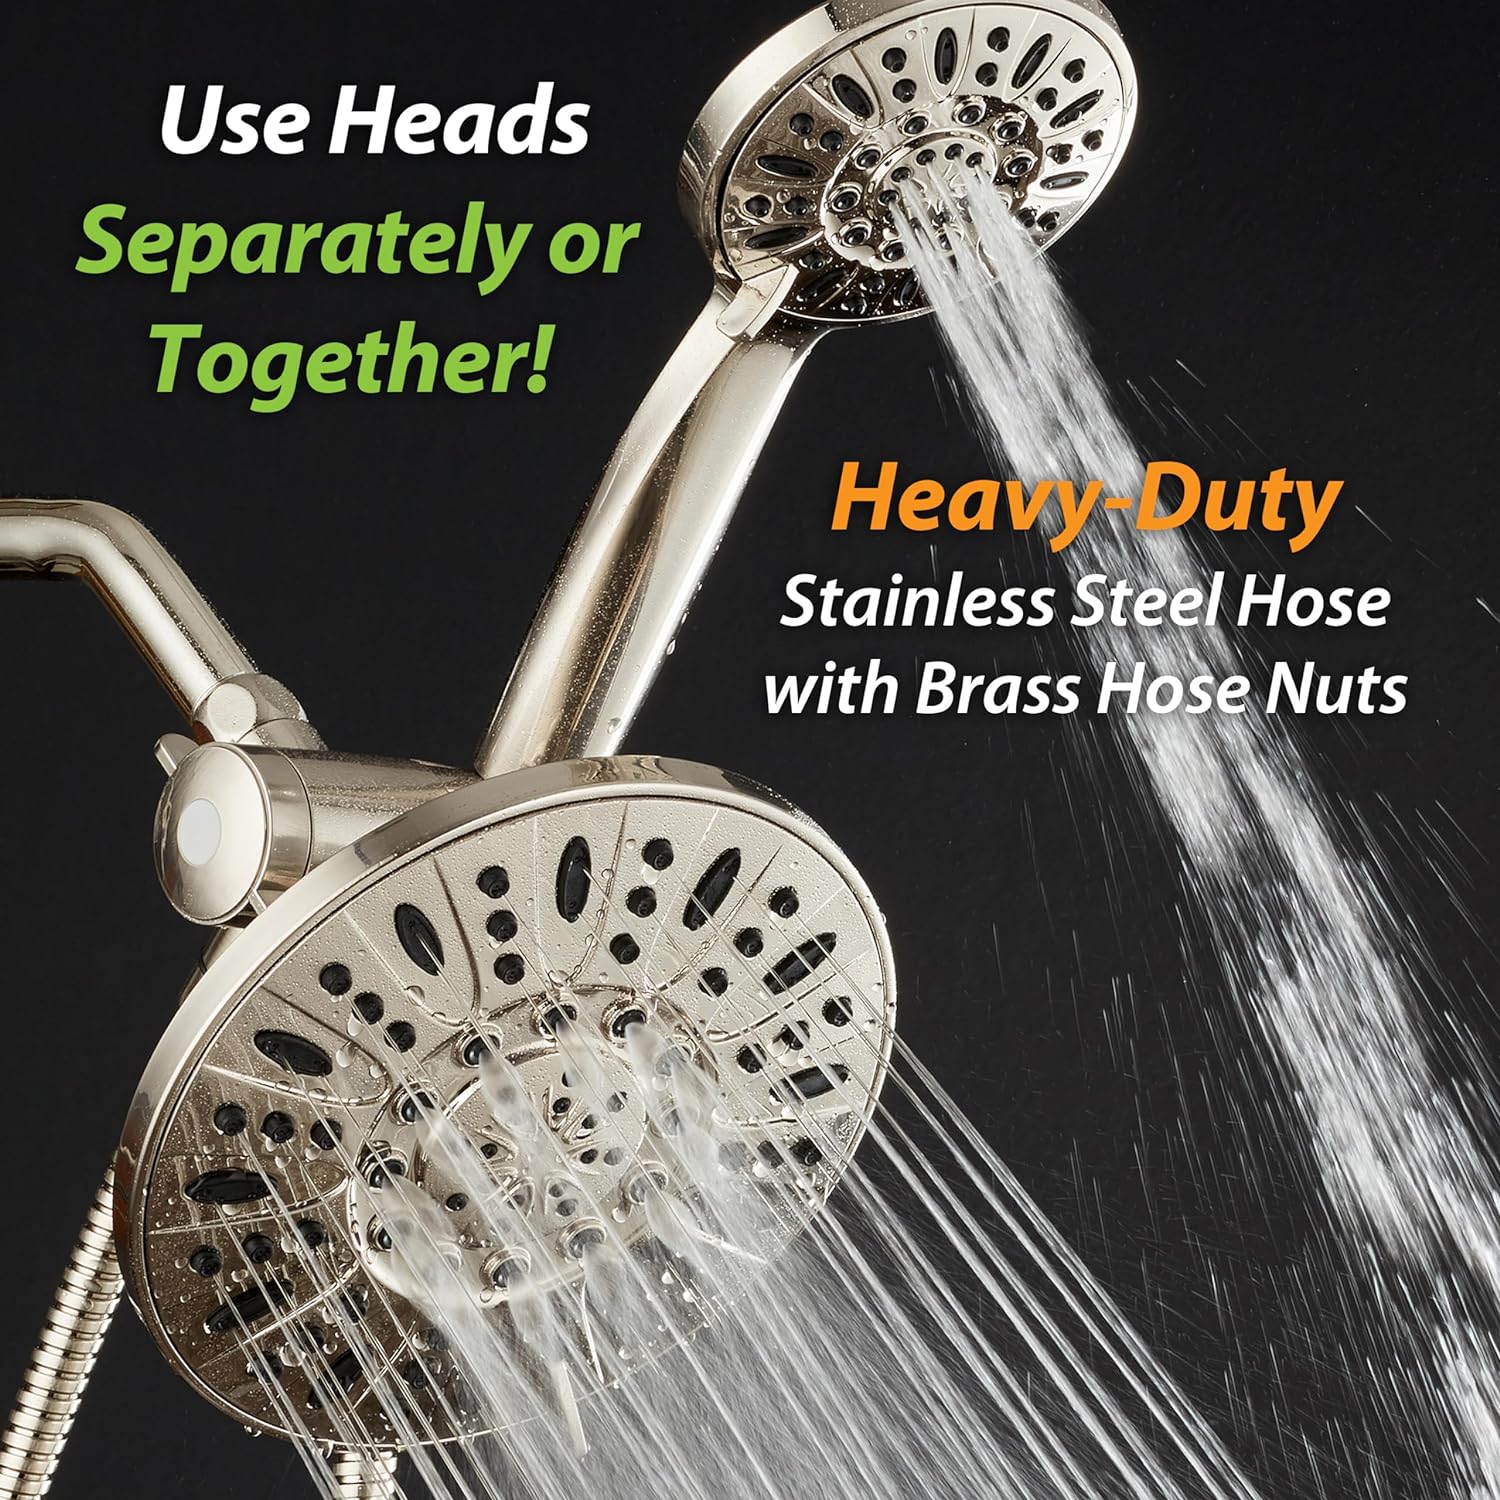 AquaDance 7 Premium High Pressure 3-Way Rainfall Combo with Stainless Steel Hose – Enjoy Luxurious 6-setting Rain Shower Head and Hand Held Shower Separately or Together – Brushed Nickel Finish